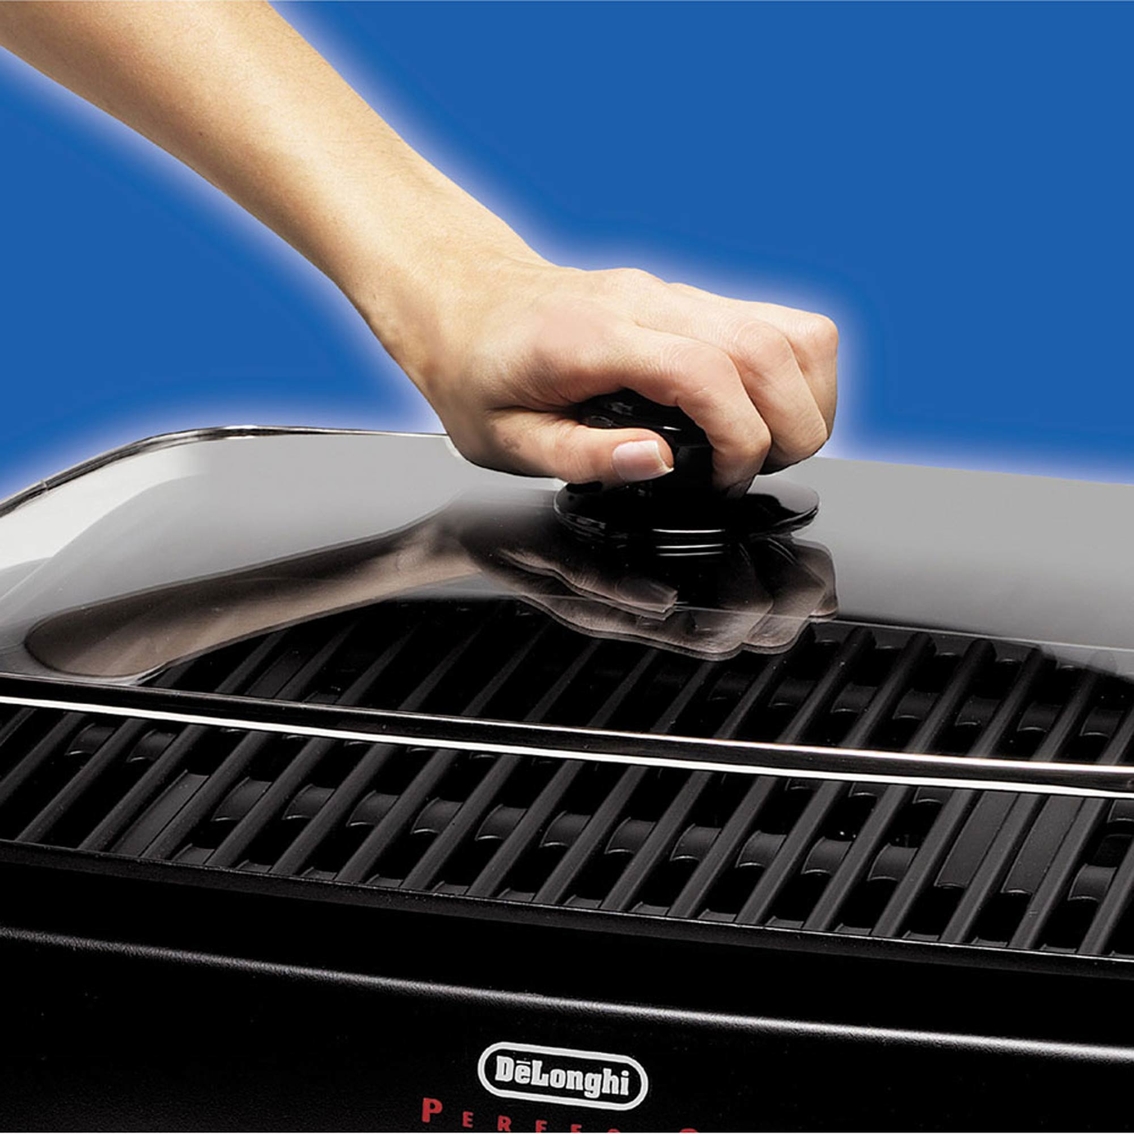 Delonghi Healthy Indoor Grill with Die Cast Aluminum Nonstick Cooking Surface - Image 7 of 8